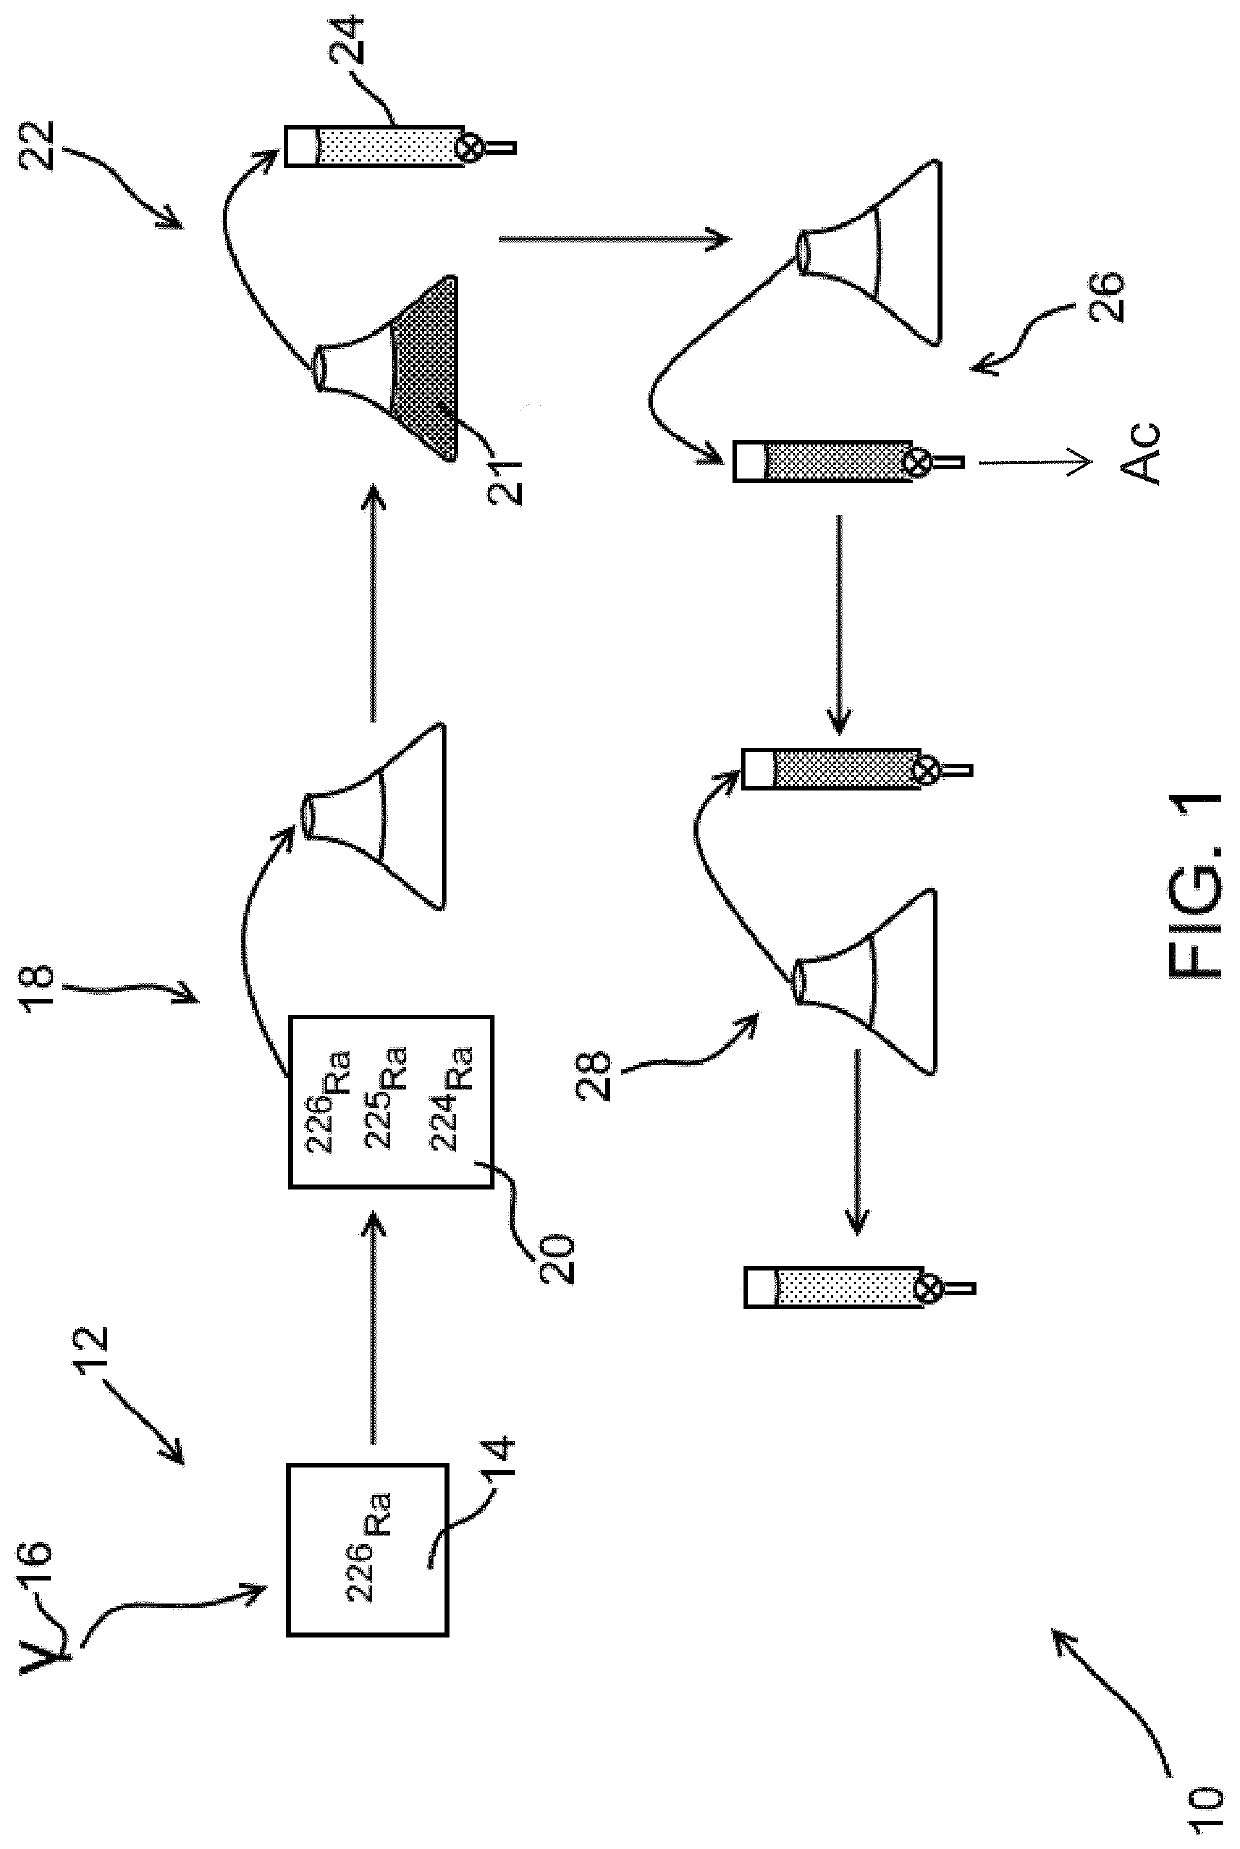 Sytem and method for collecting and isolating radiosotopes